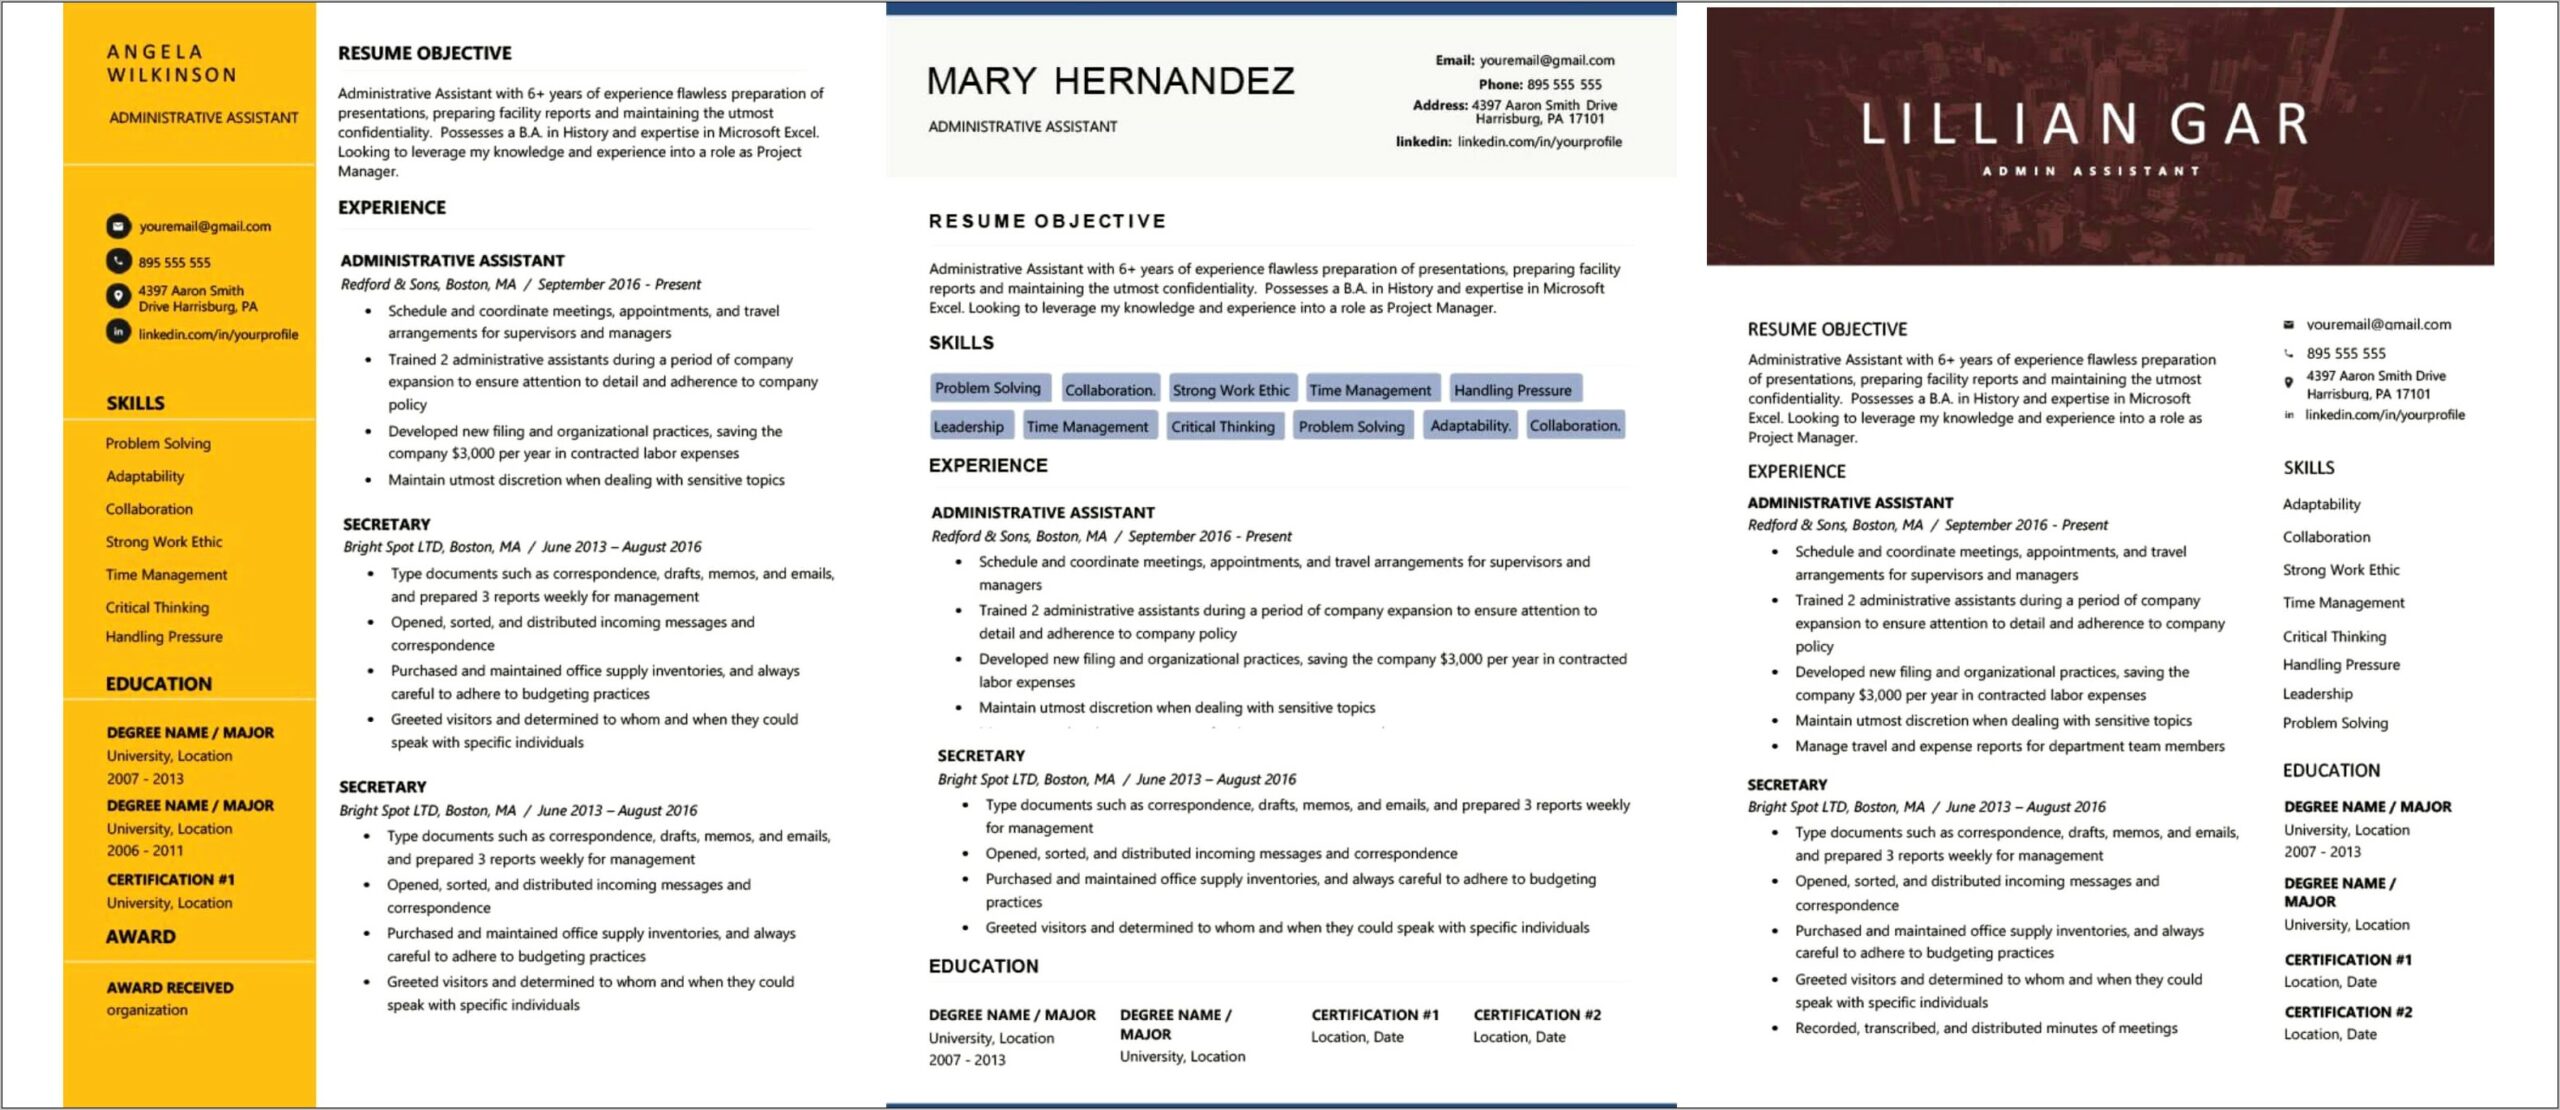 Does Philosophy Look Good On The Resume